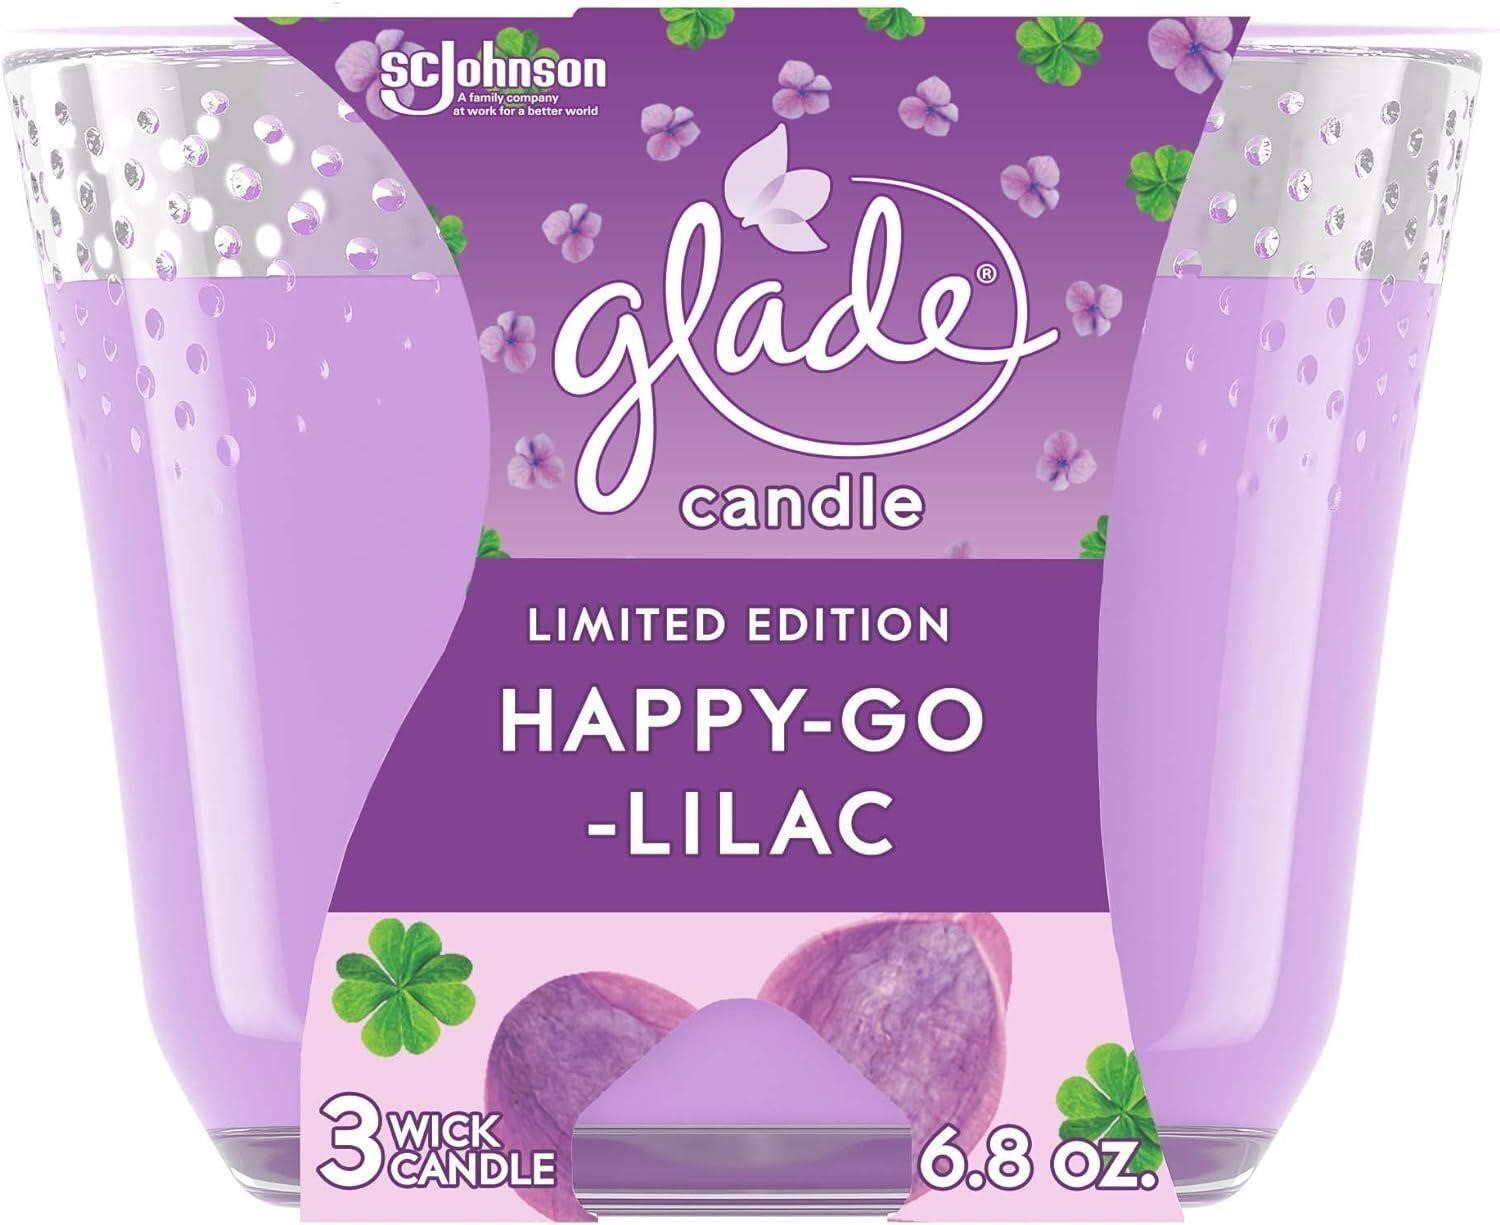 Pack of 2 Glade Candle Happy-Go-Lilac